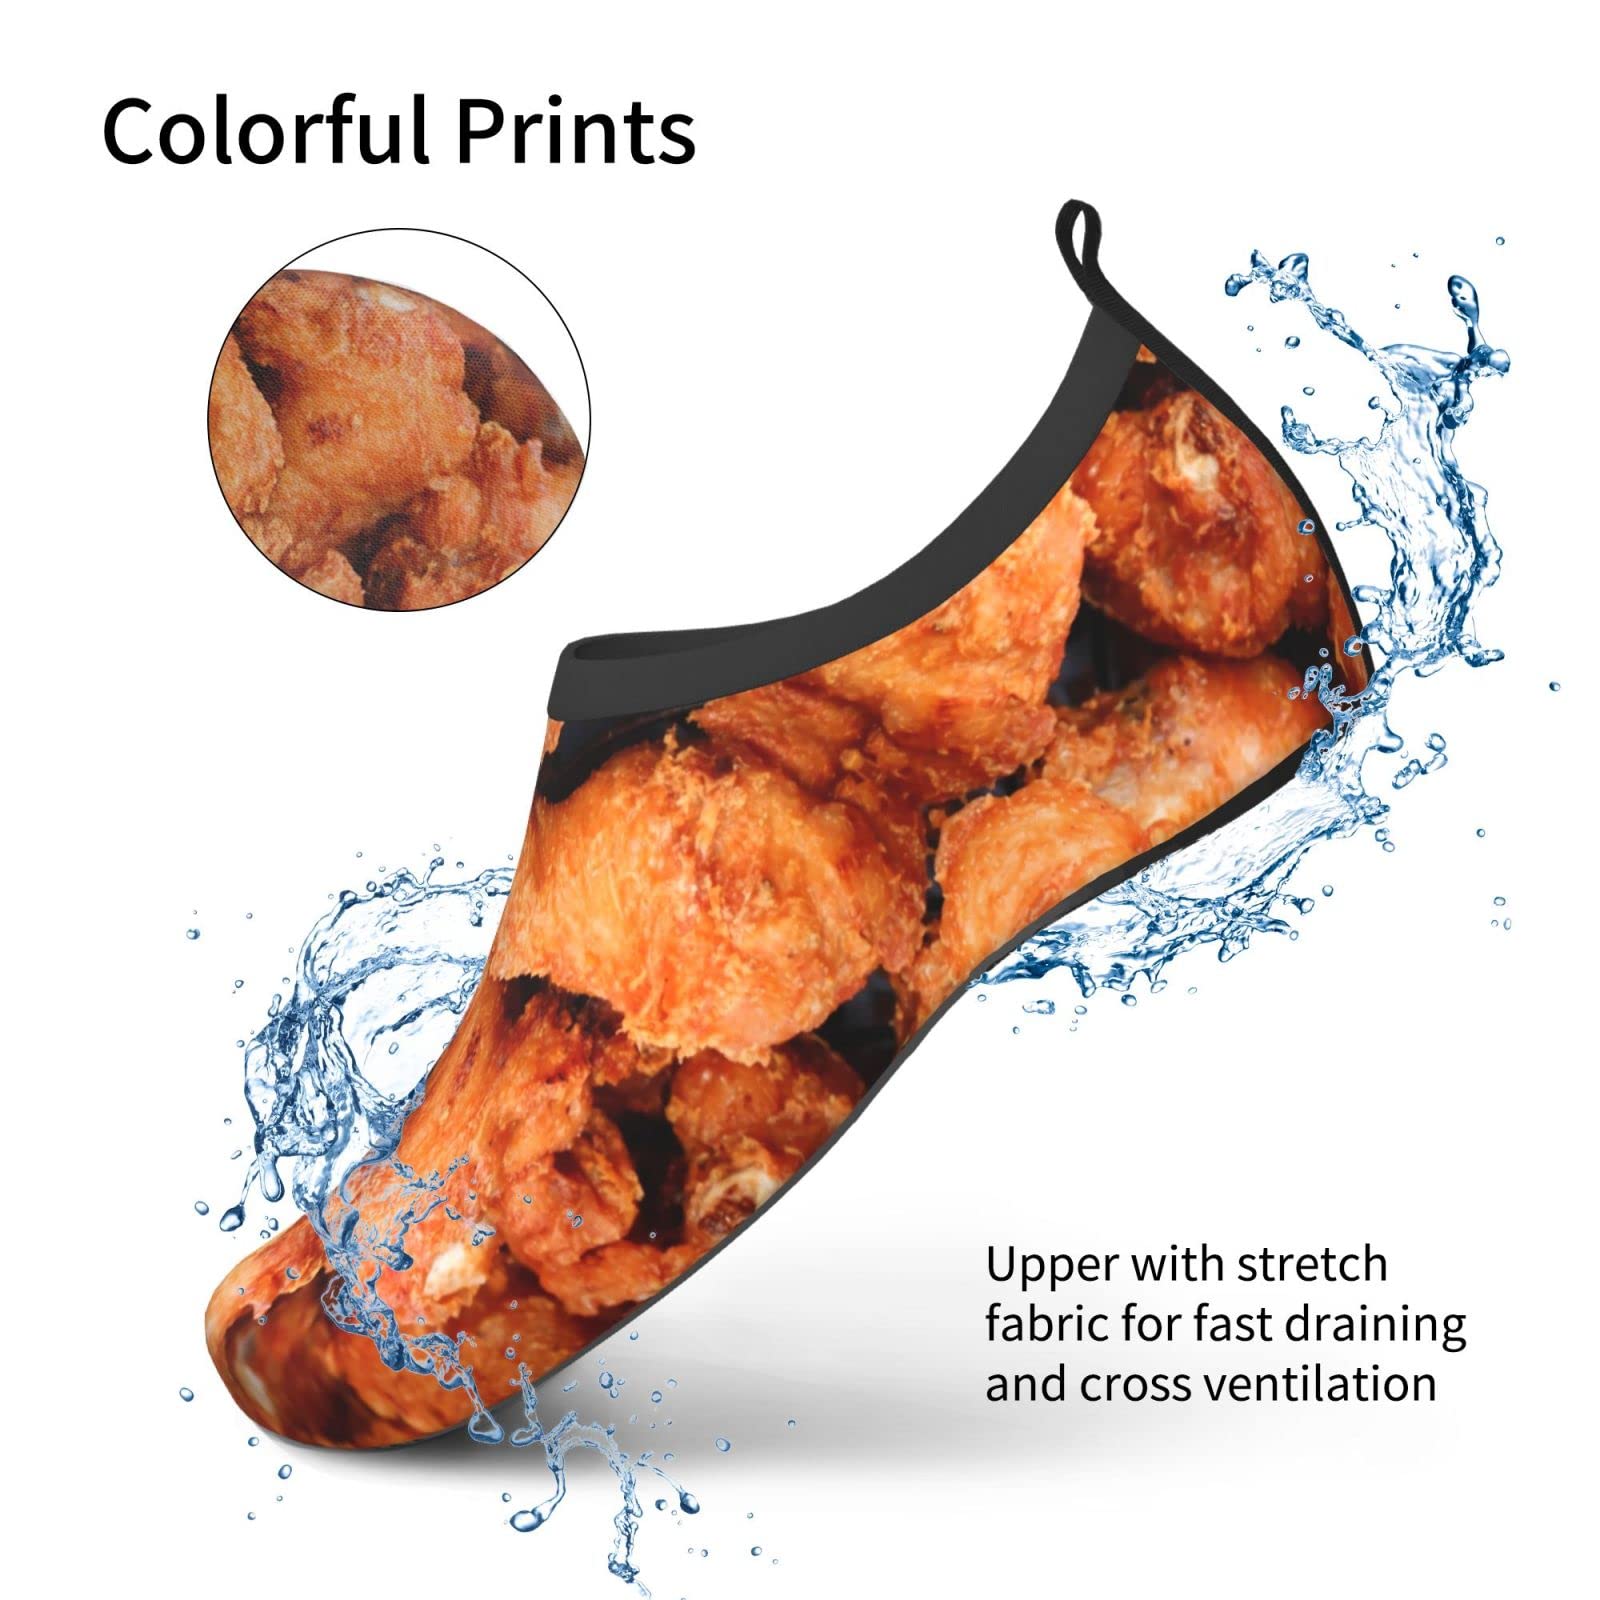 Beer and Fried Chicken Legs Water Shoes for Men Women Aqua Socks Barefoot Quick-Dry Beach Swimming Shoes for Yoga Pool Exercise Swim Surf